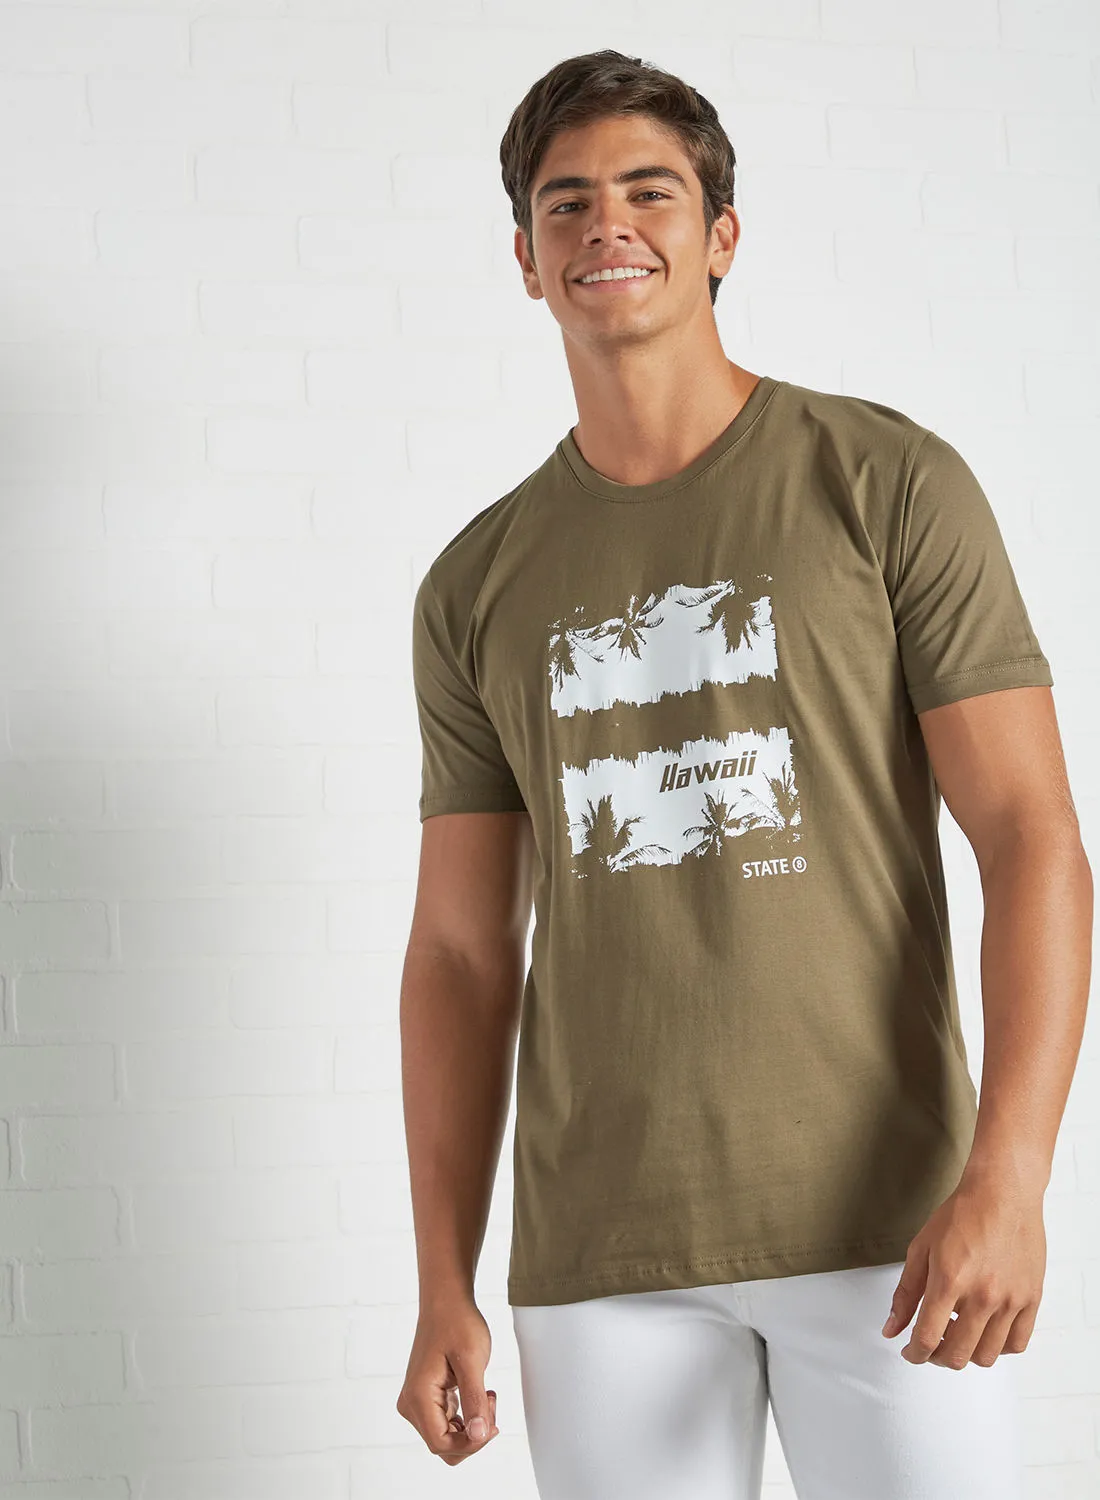 STATE 8 Graphic Print T-Shirt Olive